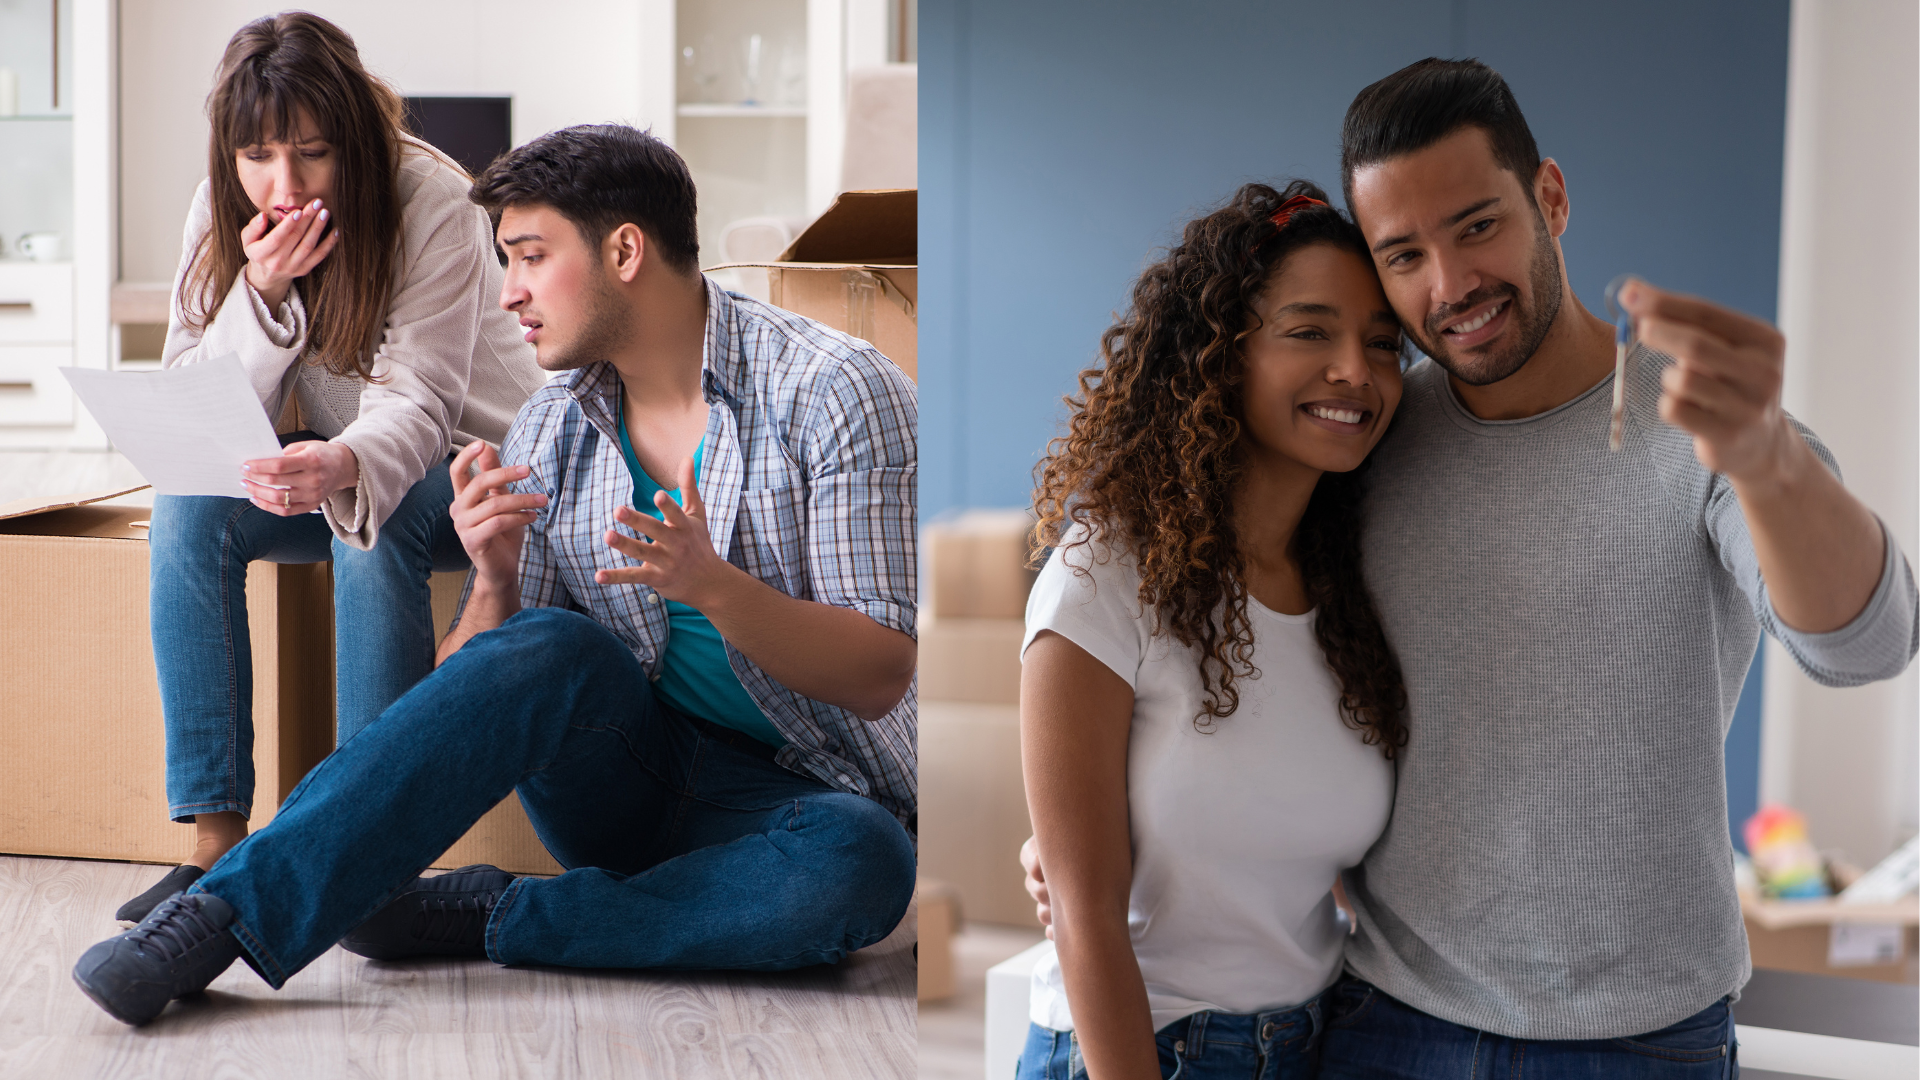 Split-screen image of an individual concerned about a default and a couple happy with their new home keys, illustrating the journey from default to mortgage.